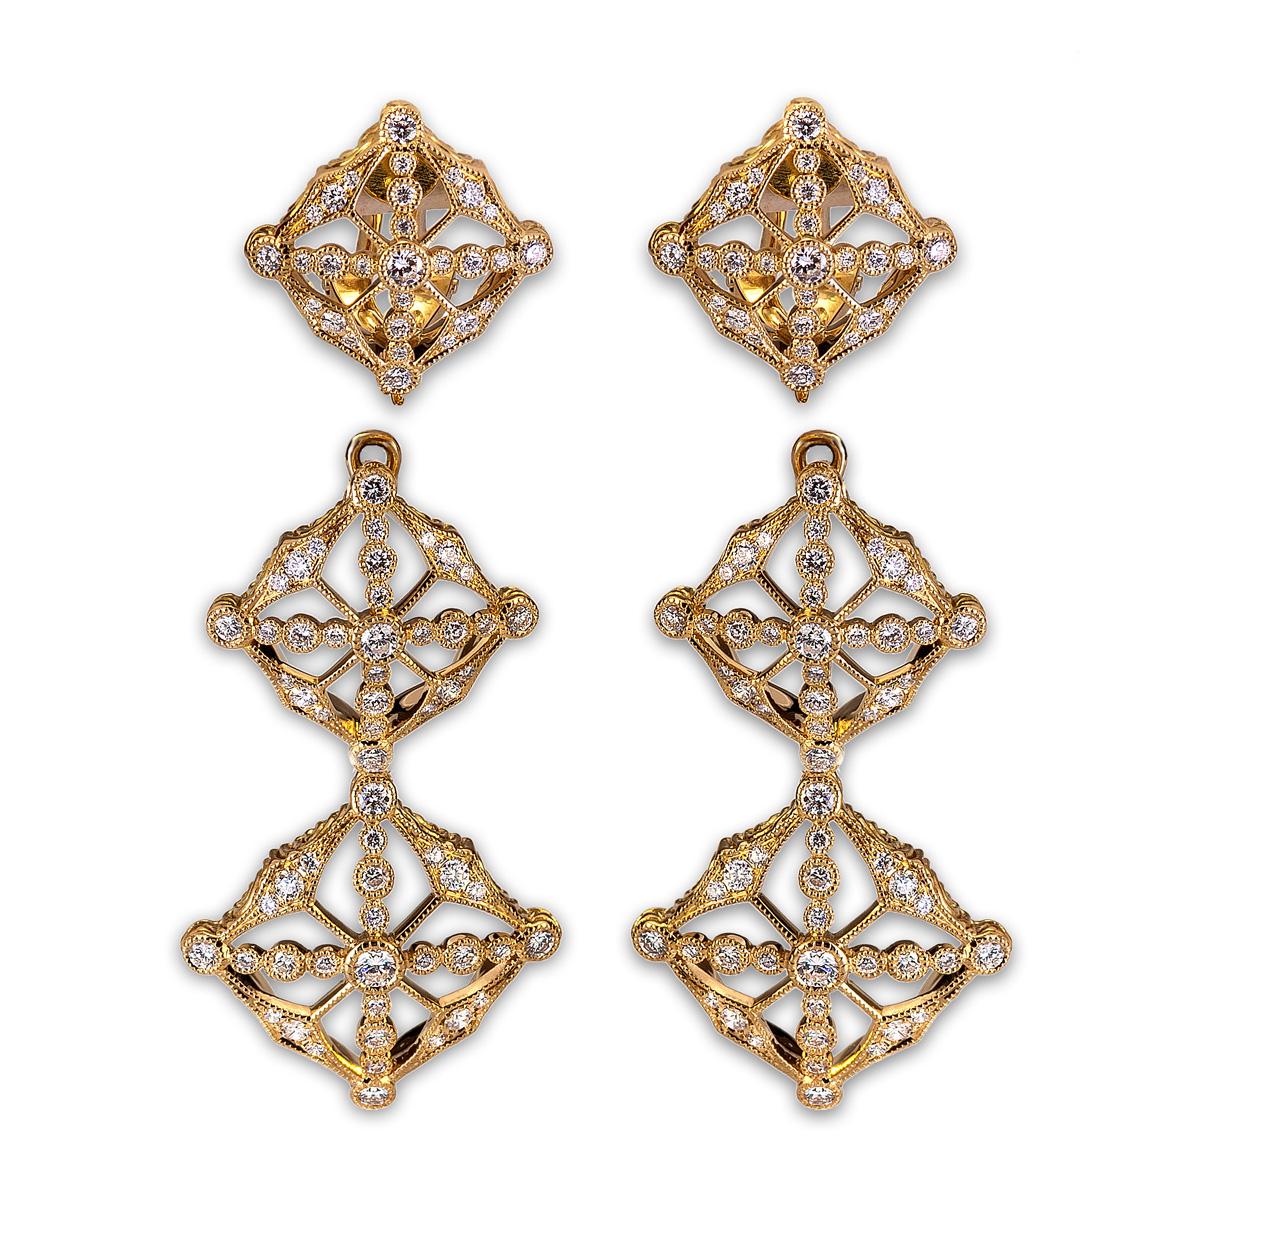 18 karat yellow gold earrings created by world-renowned jewelry designer, Danuta, masterfully set with 1.87 carats F-VVS white diamonds which strategically line the three-tiered contemporary open and versatile design. The elegantly dangling design